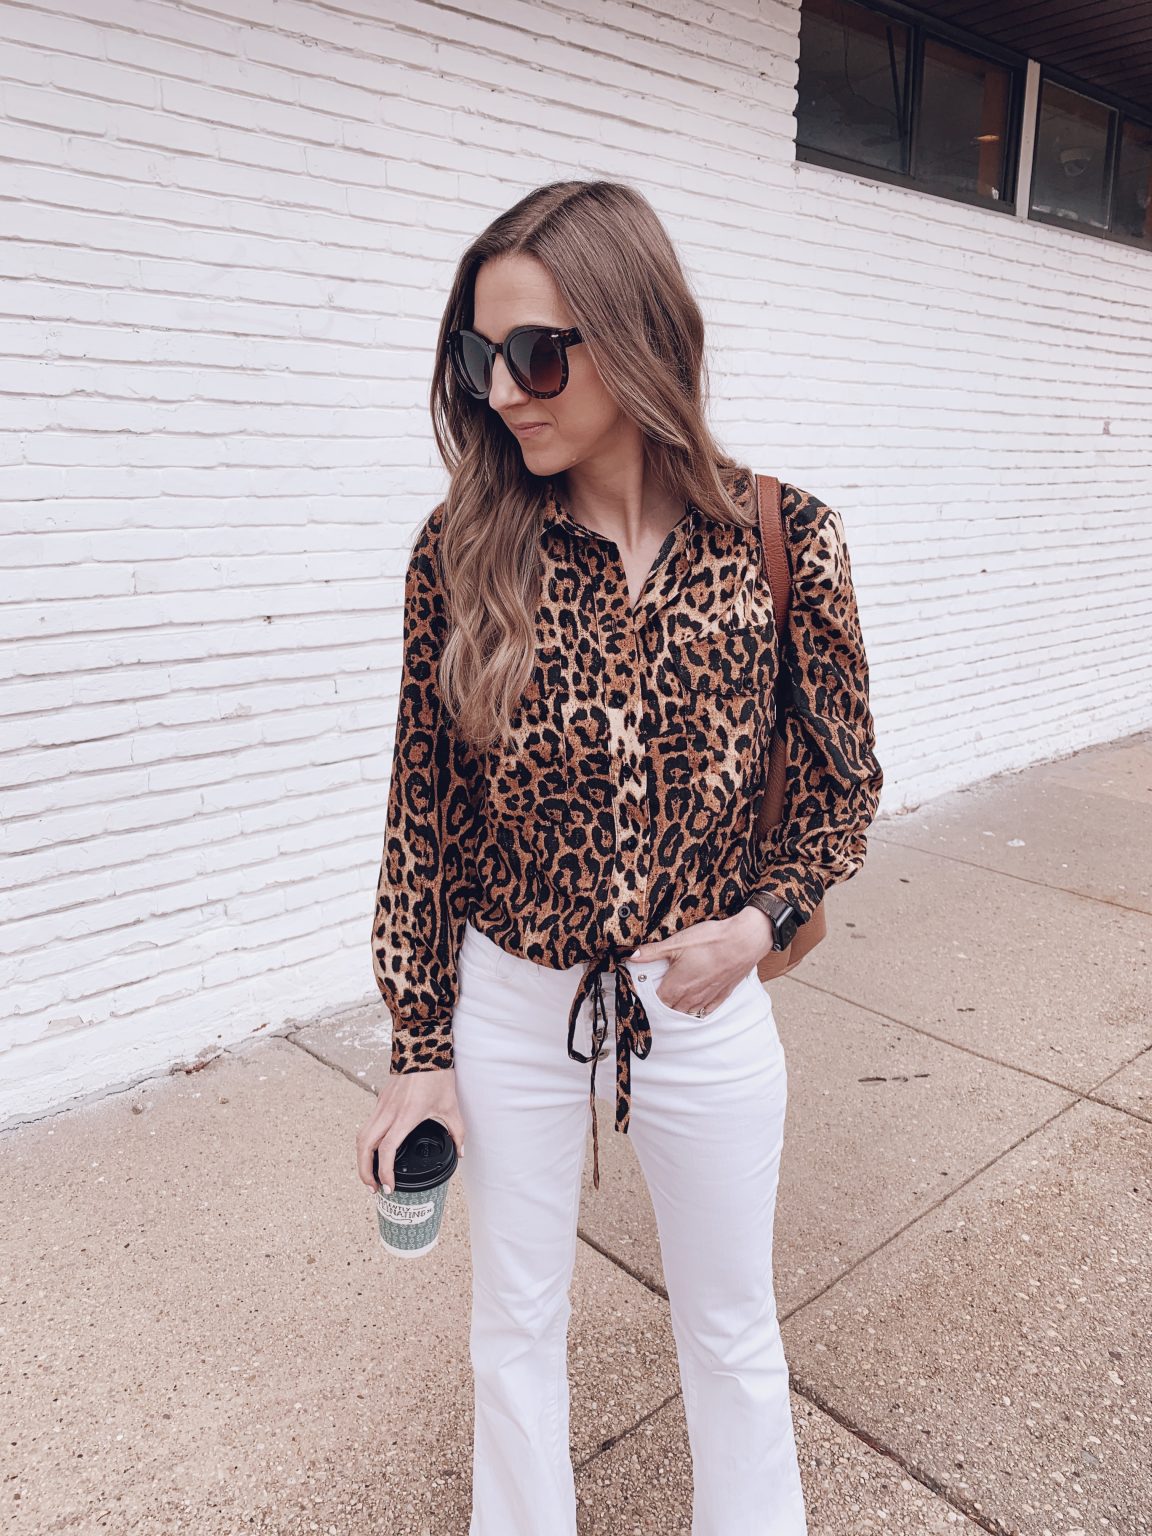 How to Wear White Jeans to Work - Sunsets and Stilettos